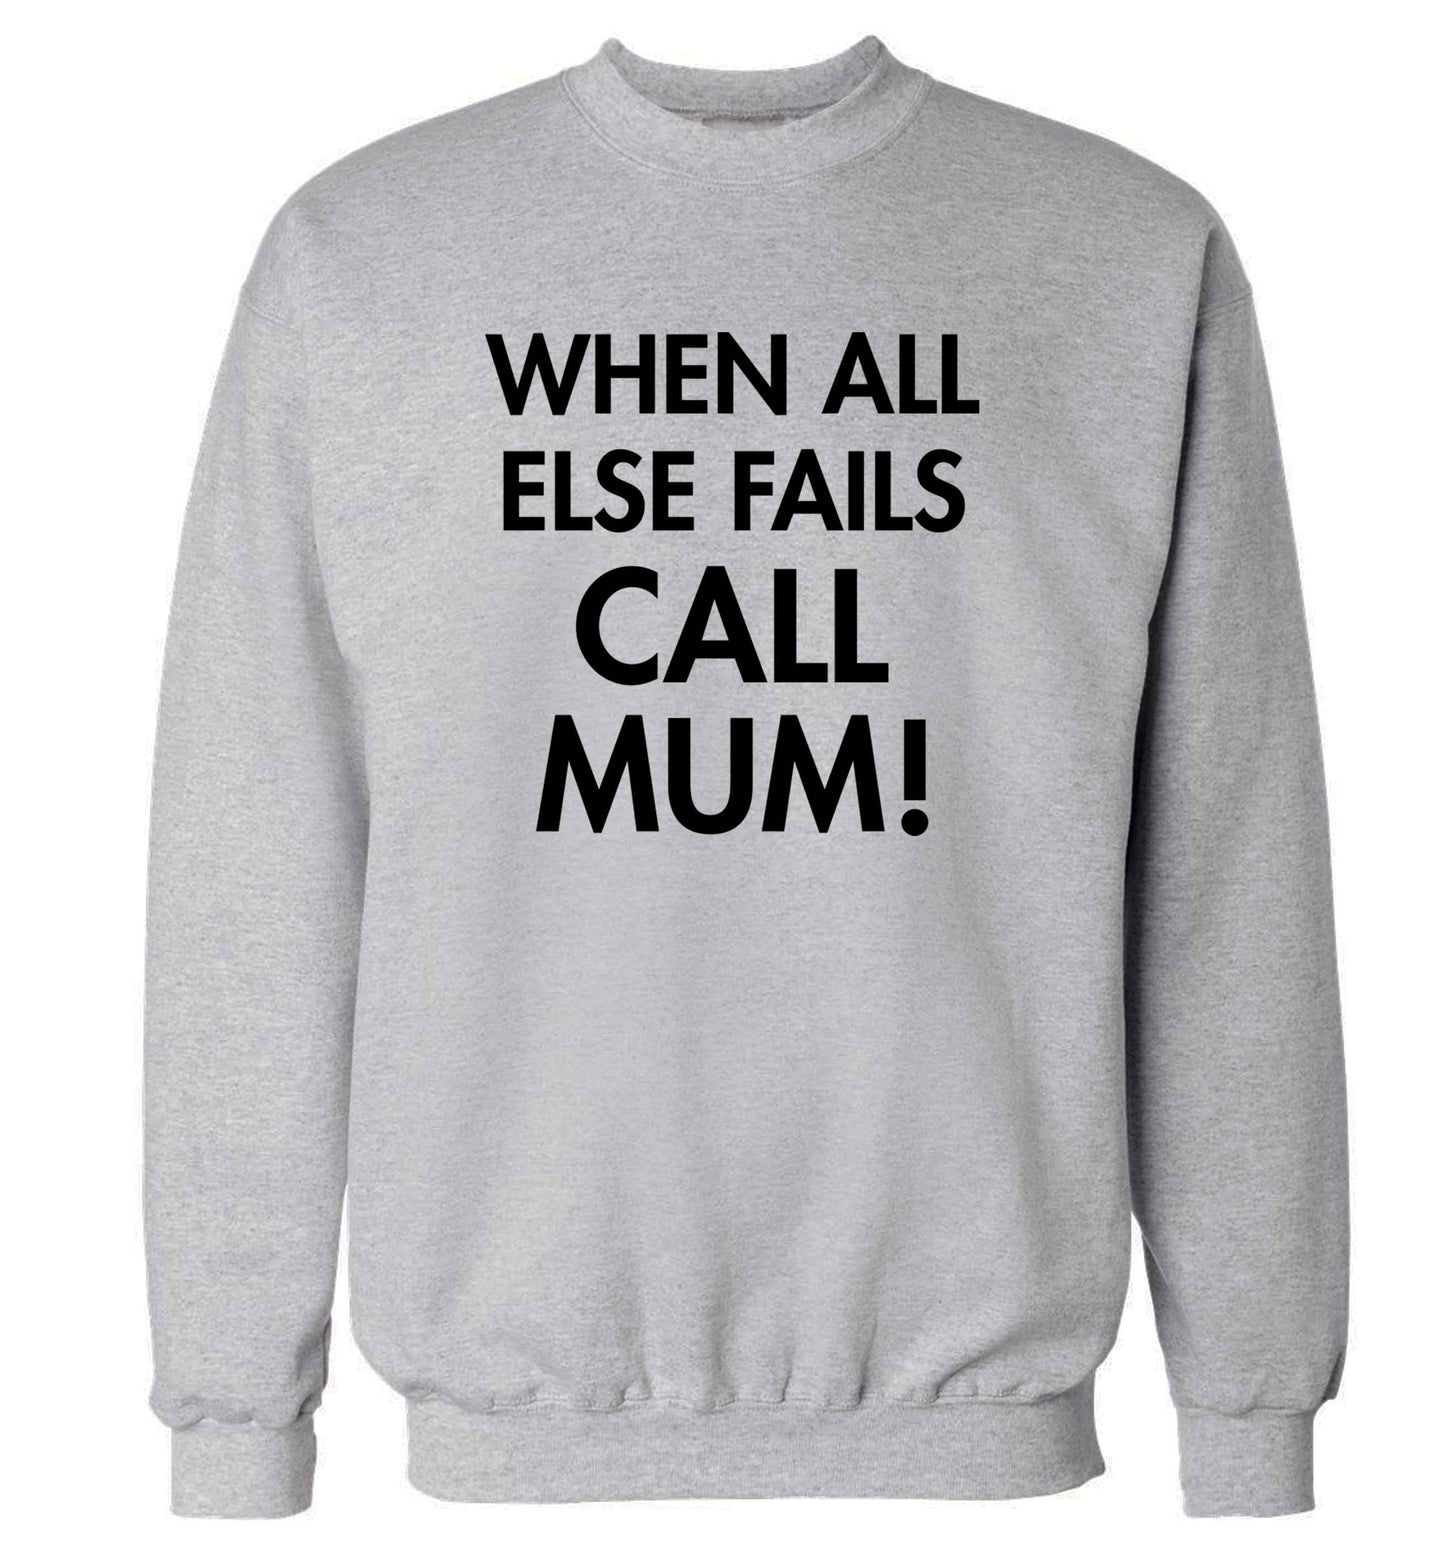 When all else fails call mum! adult's unisex grey sweater 2XL